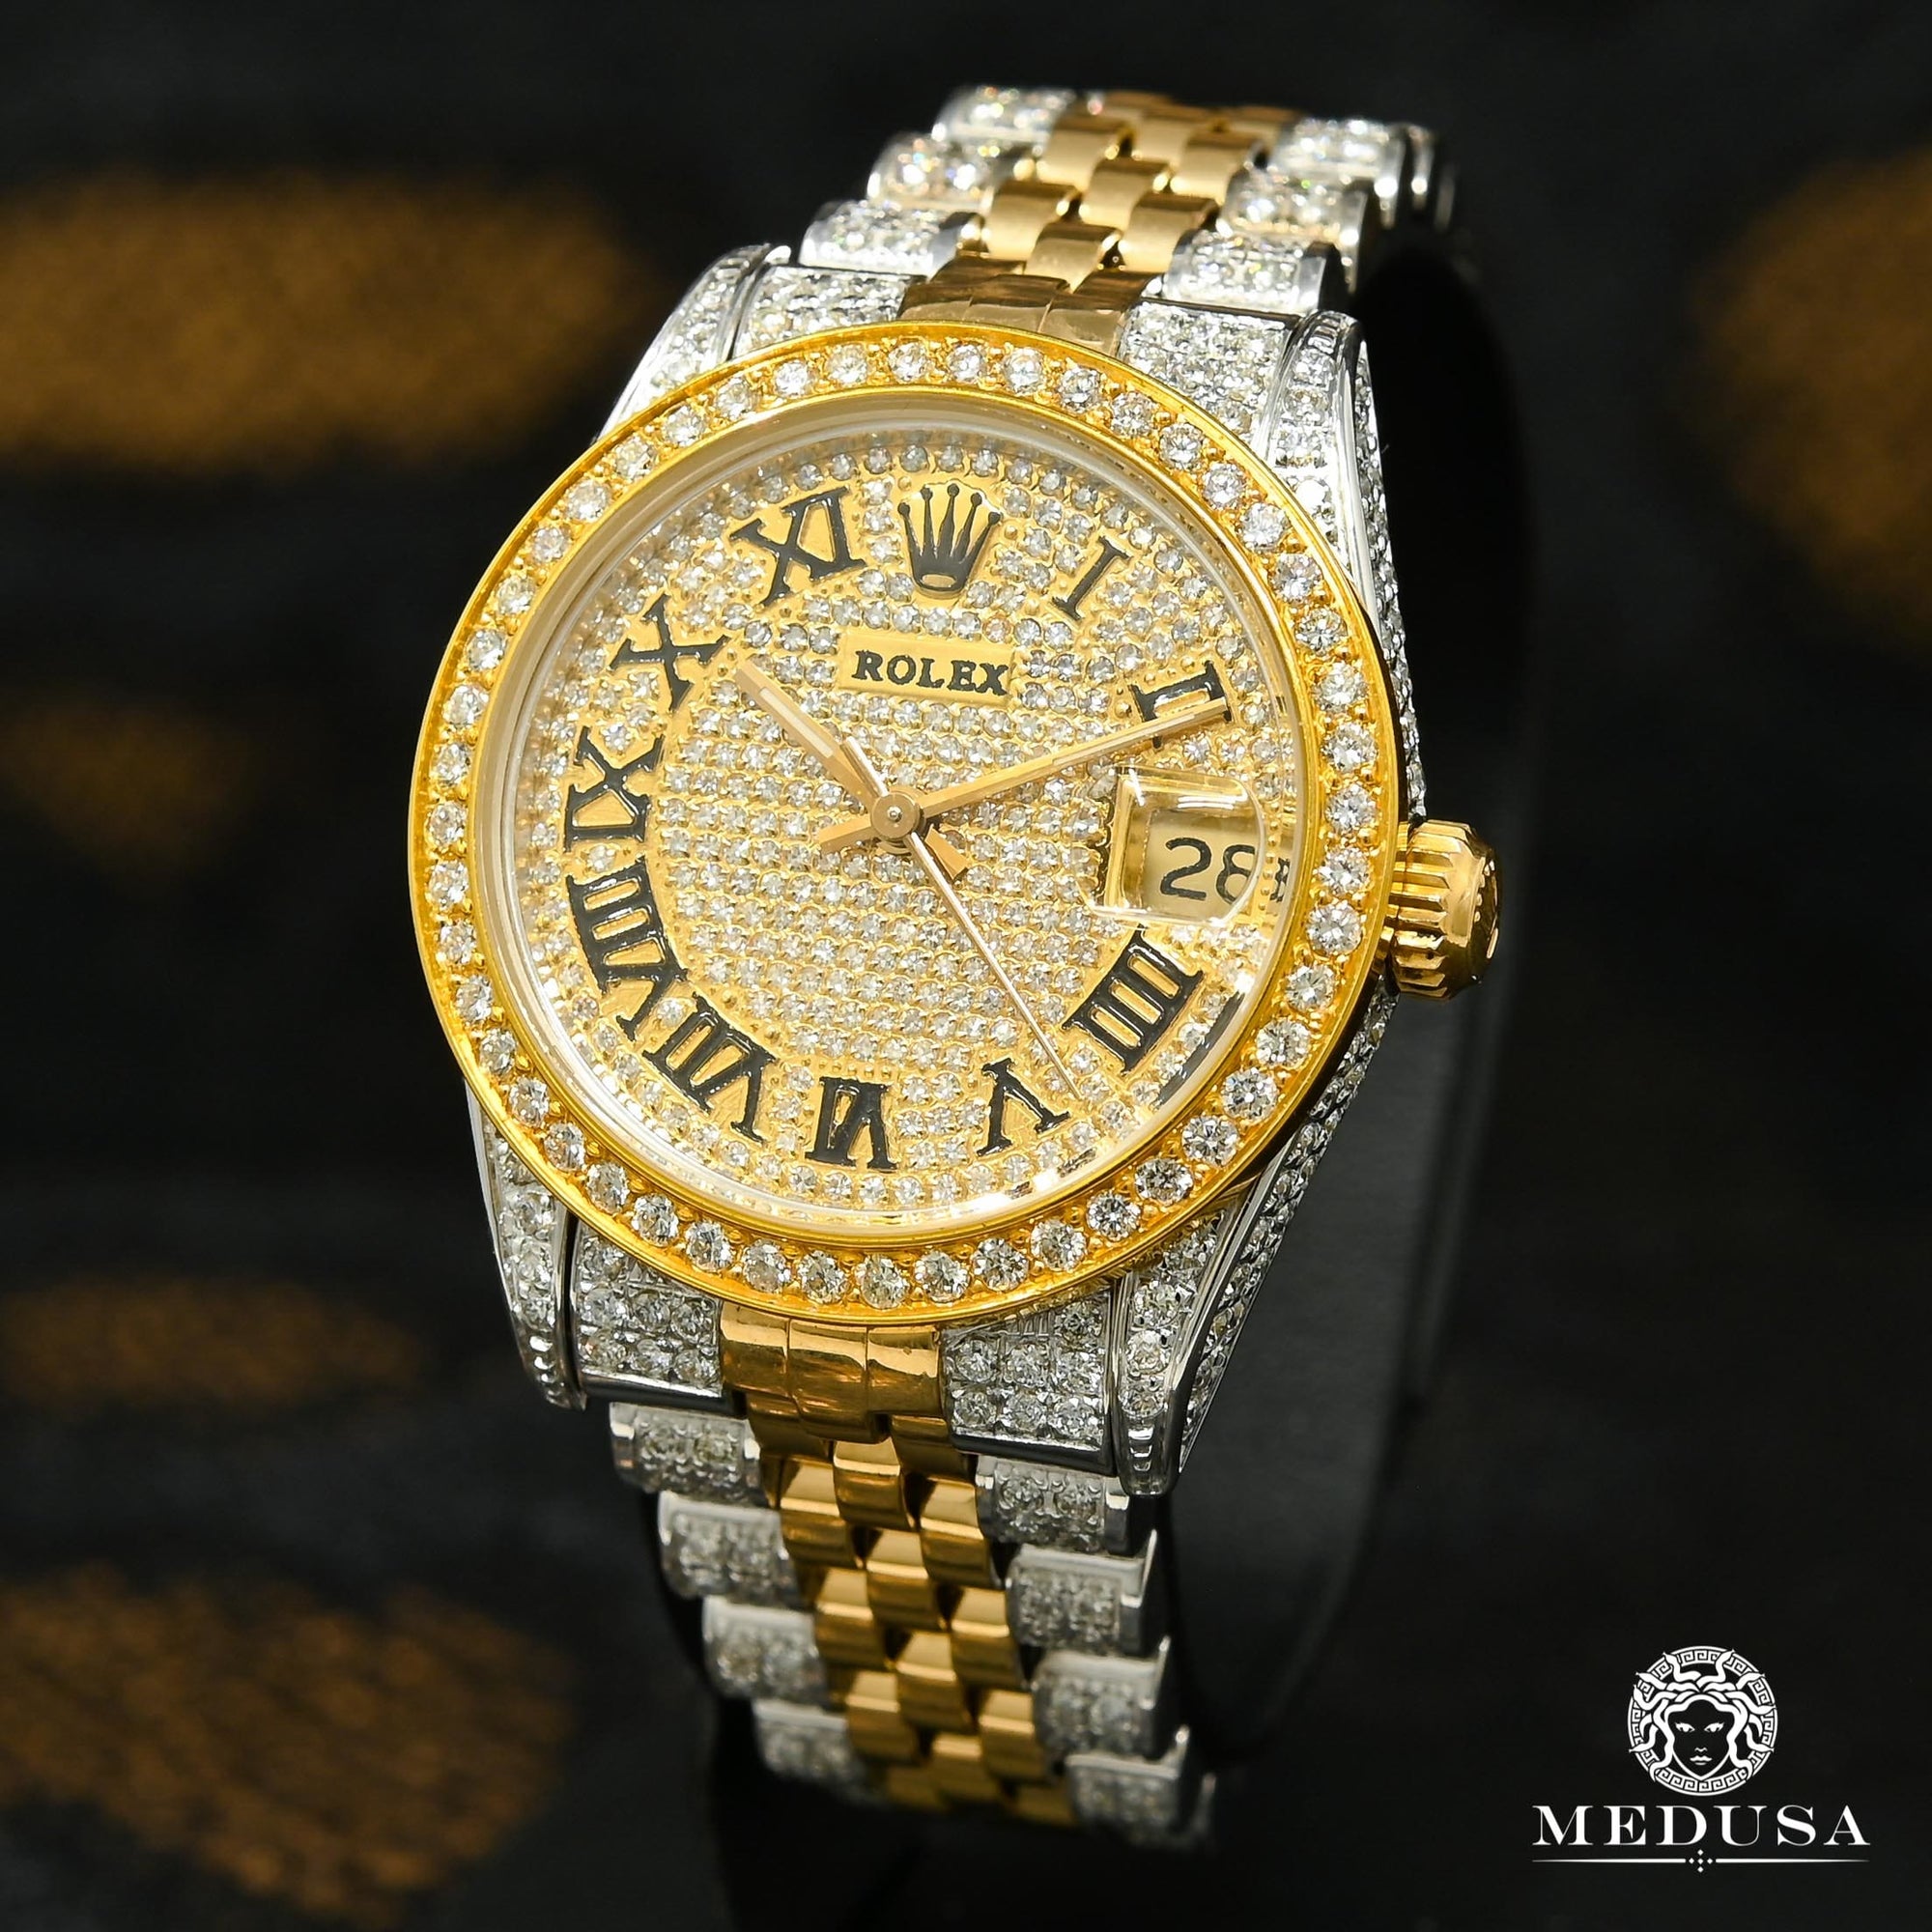 Rolex watch | Rolex Lady-Datejust Women's Watch 31mm - Iced Out Gold 2 Tones